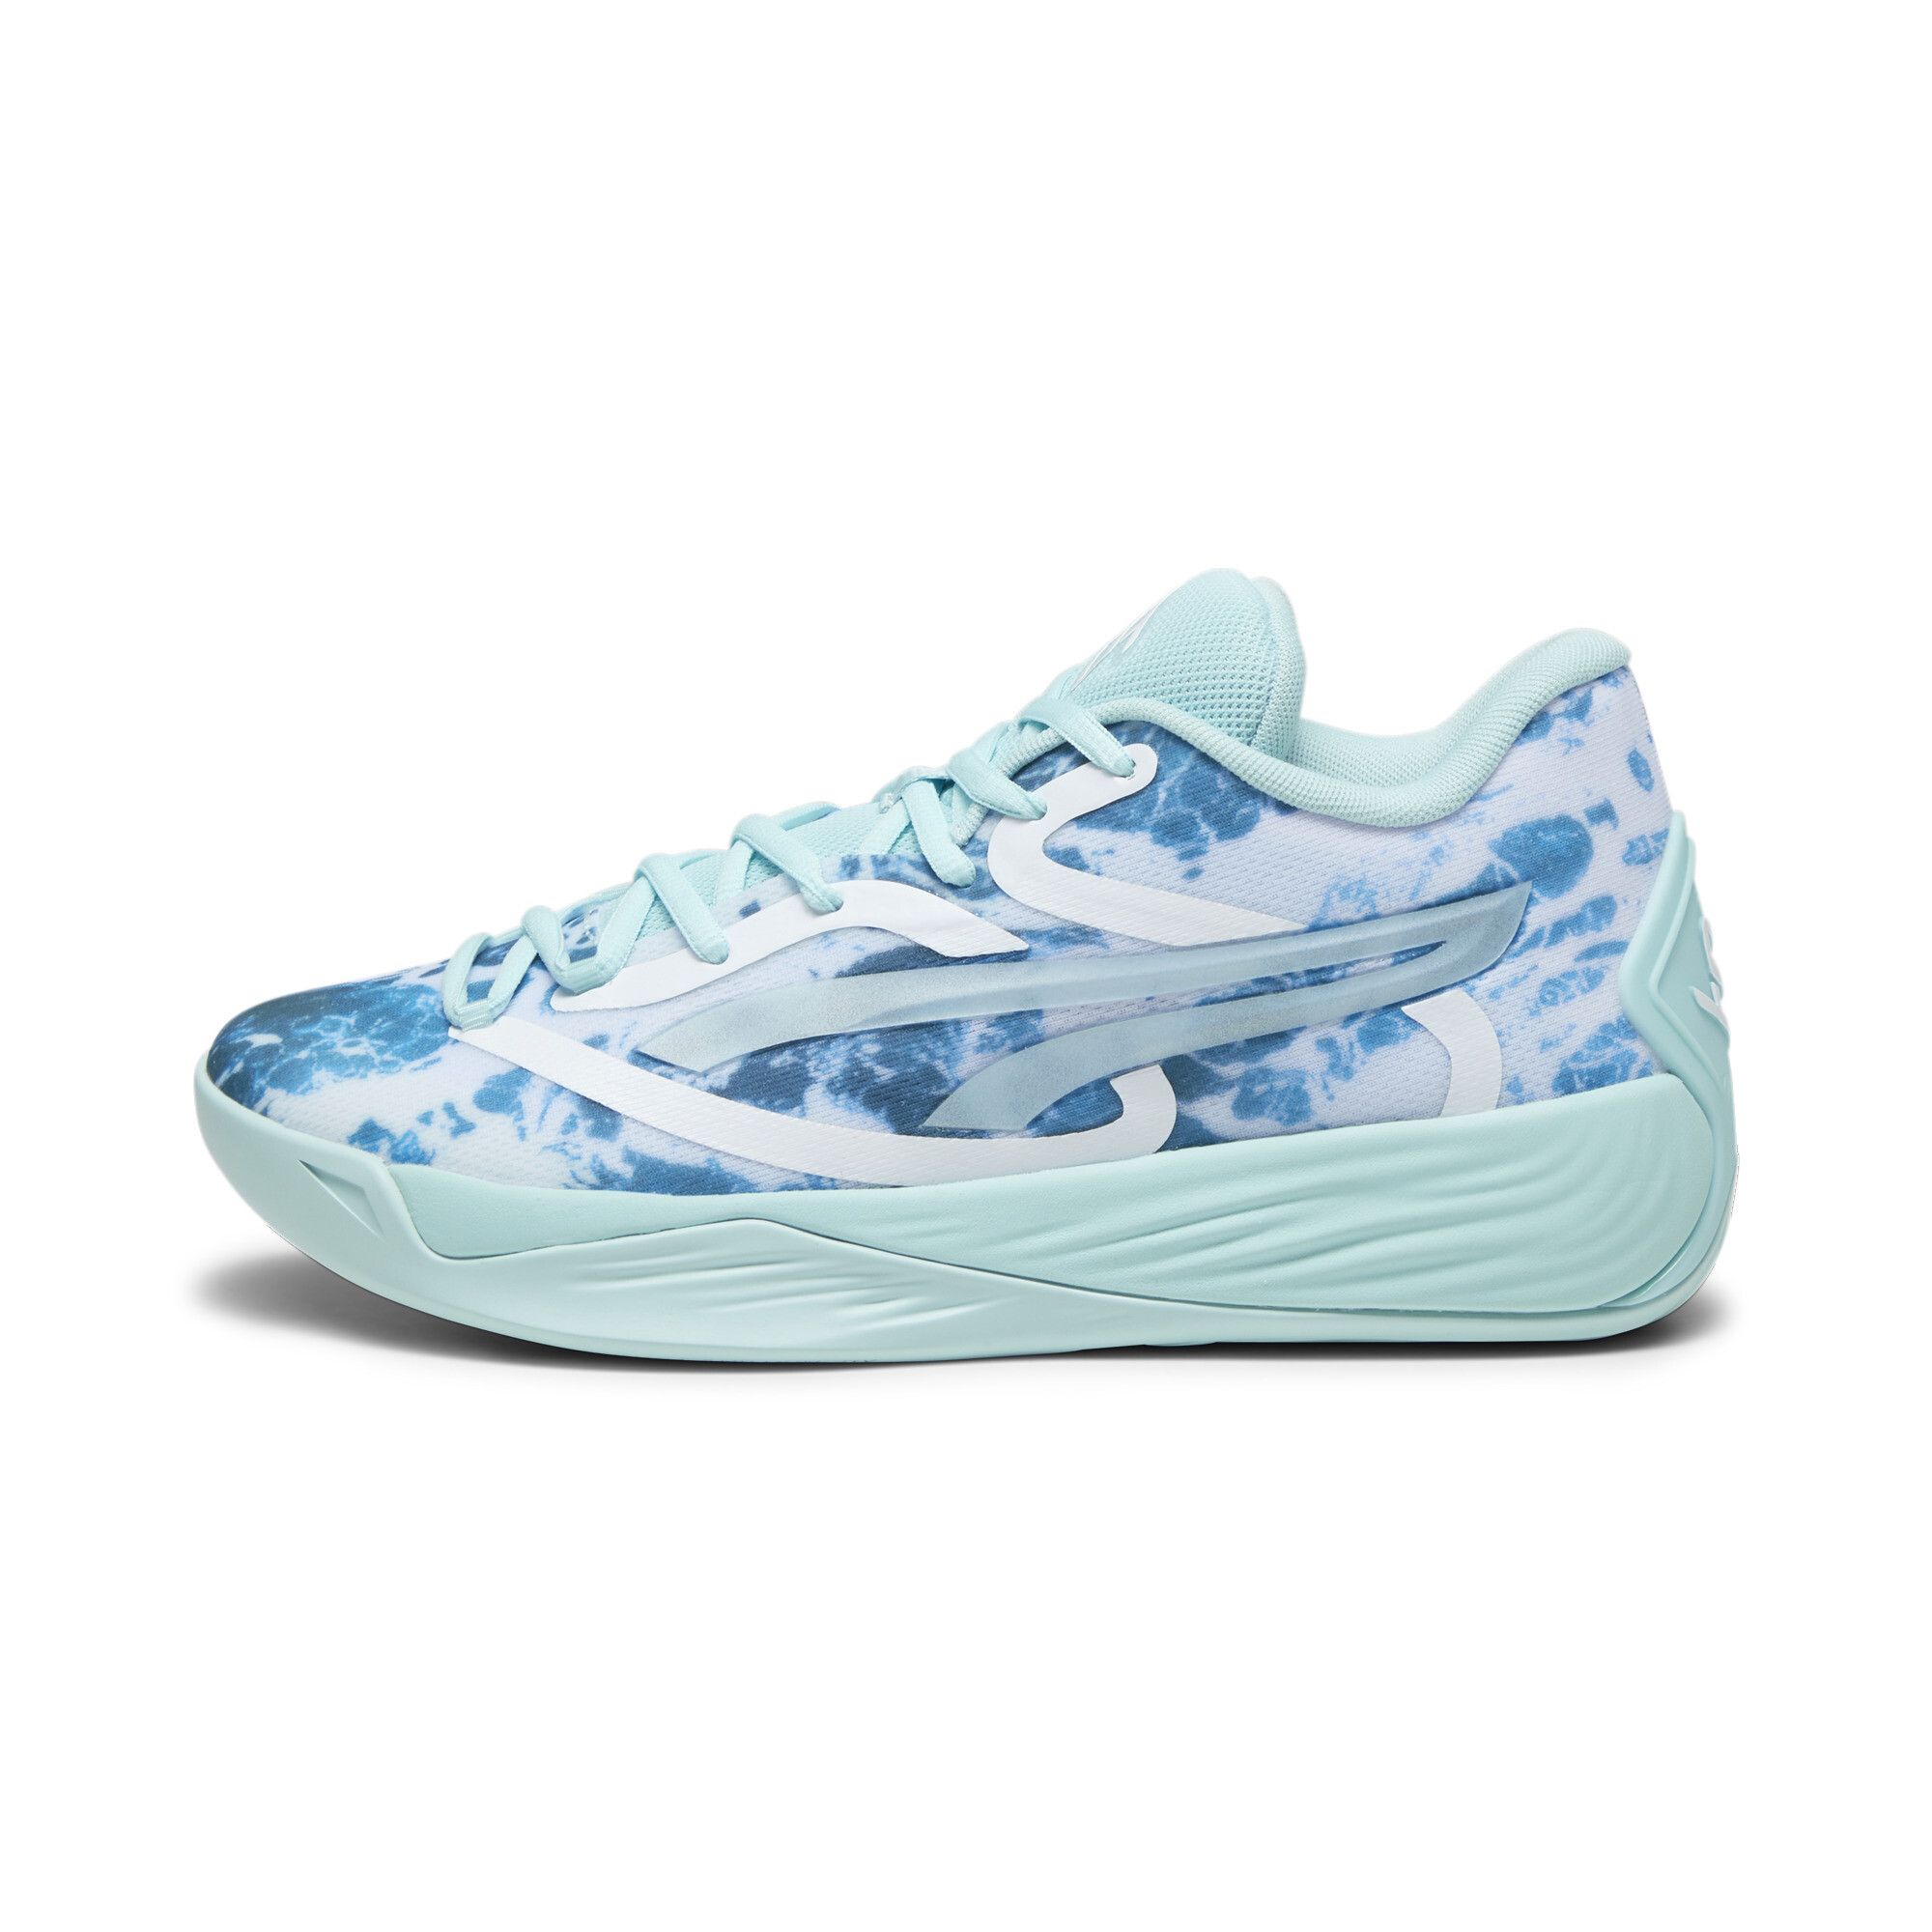 Women's Puma Stewie 2 Water's Basketball Shoes, Blue, Size 40.5, Shoes